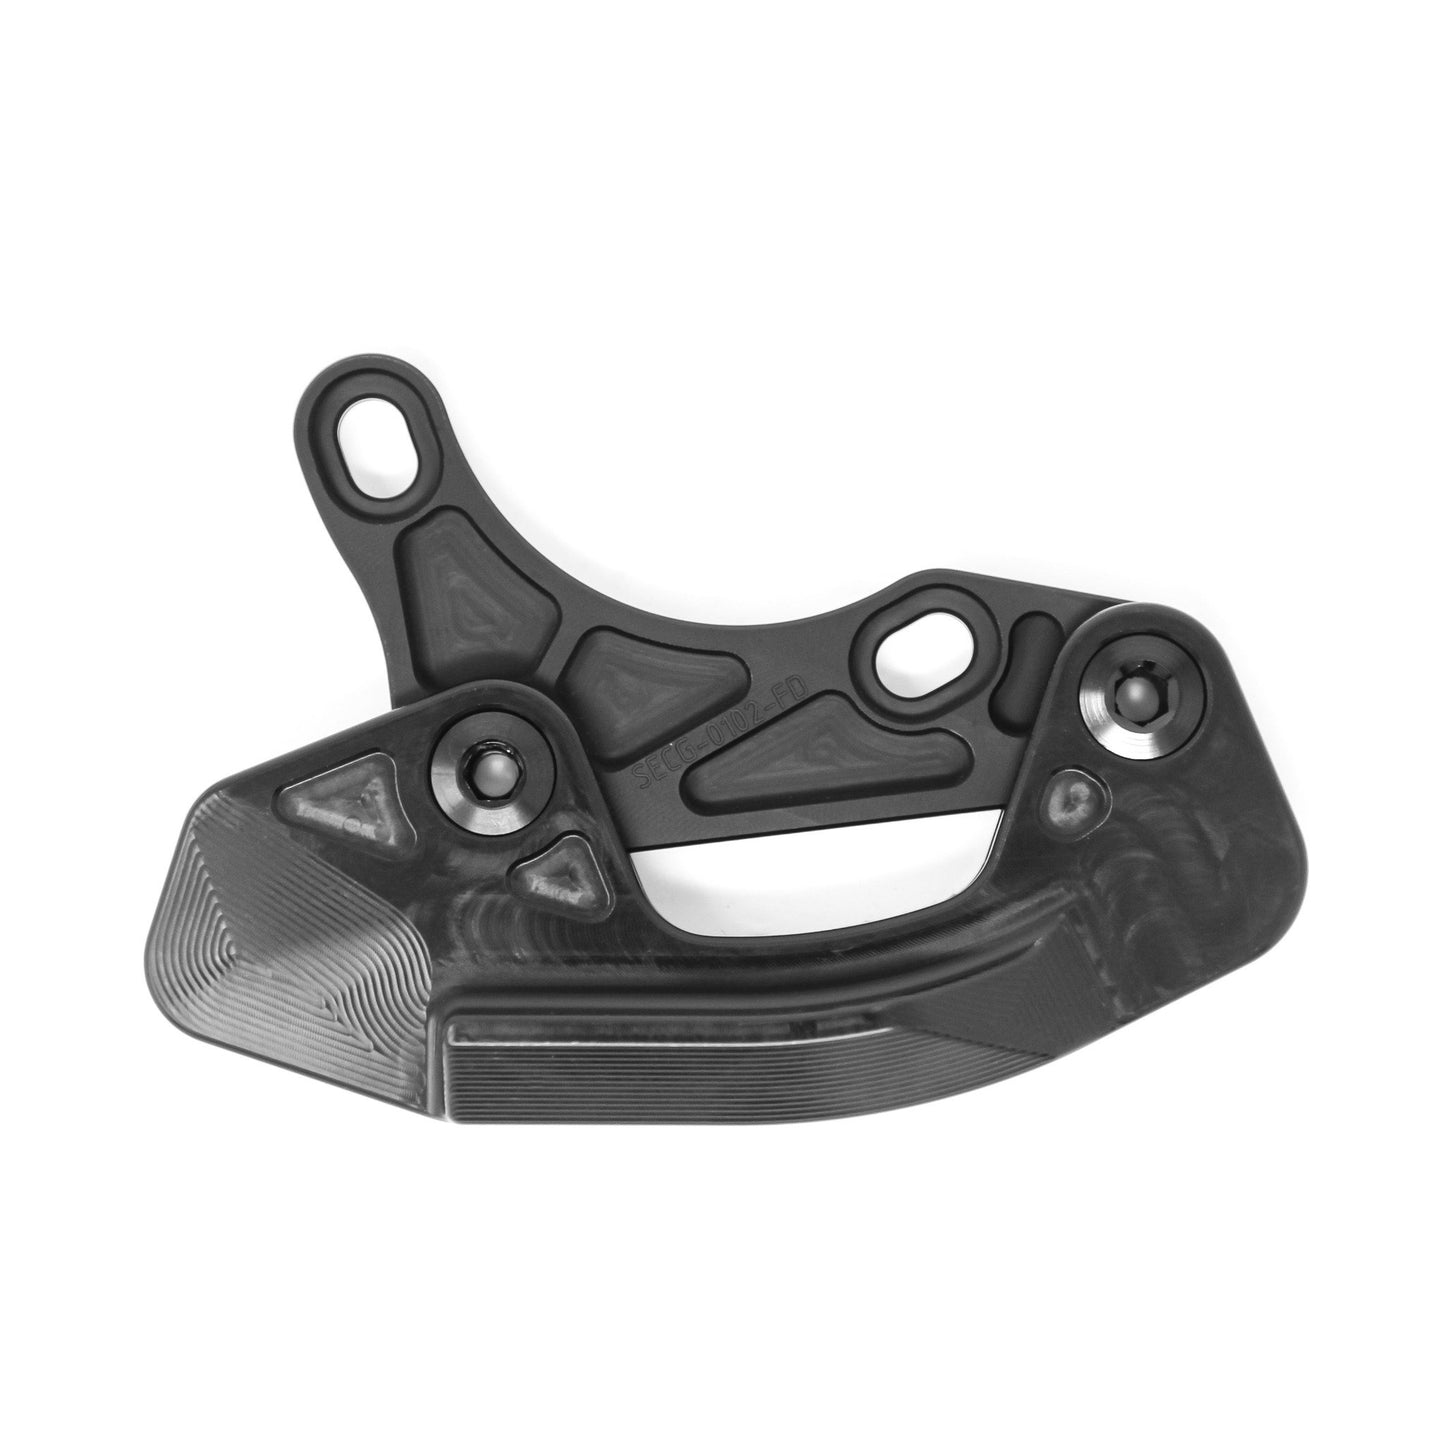 Forbidden Lower Chain Guide Black 30 Tooth Product